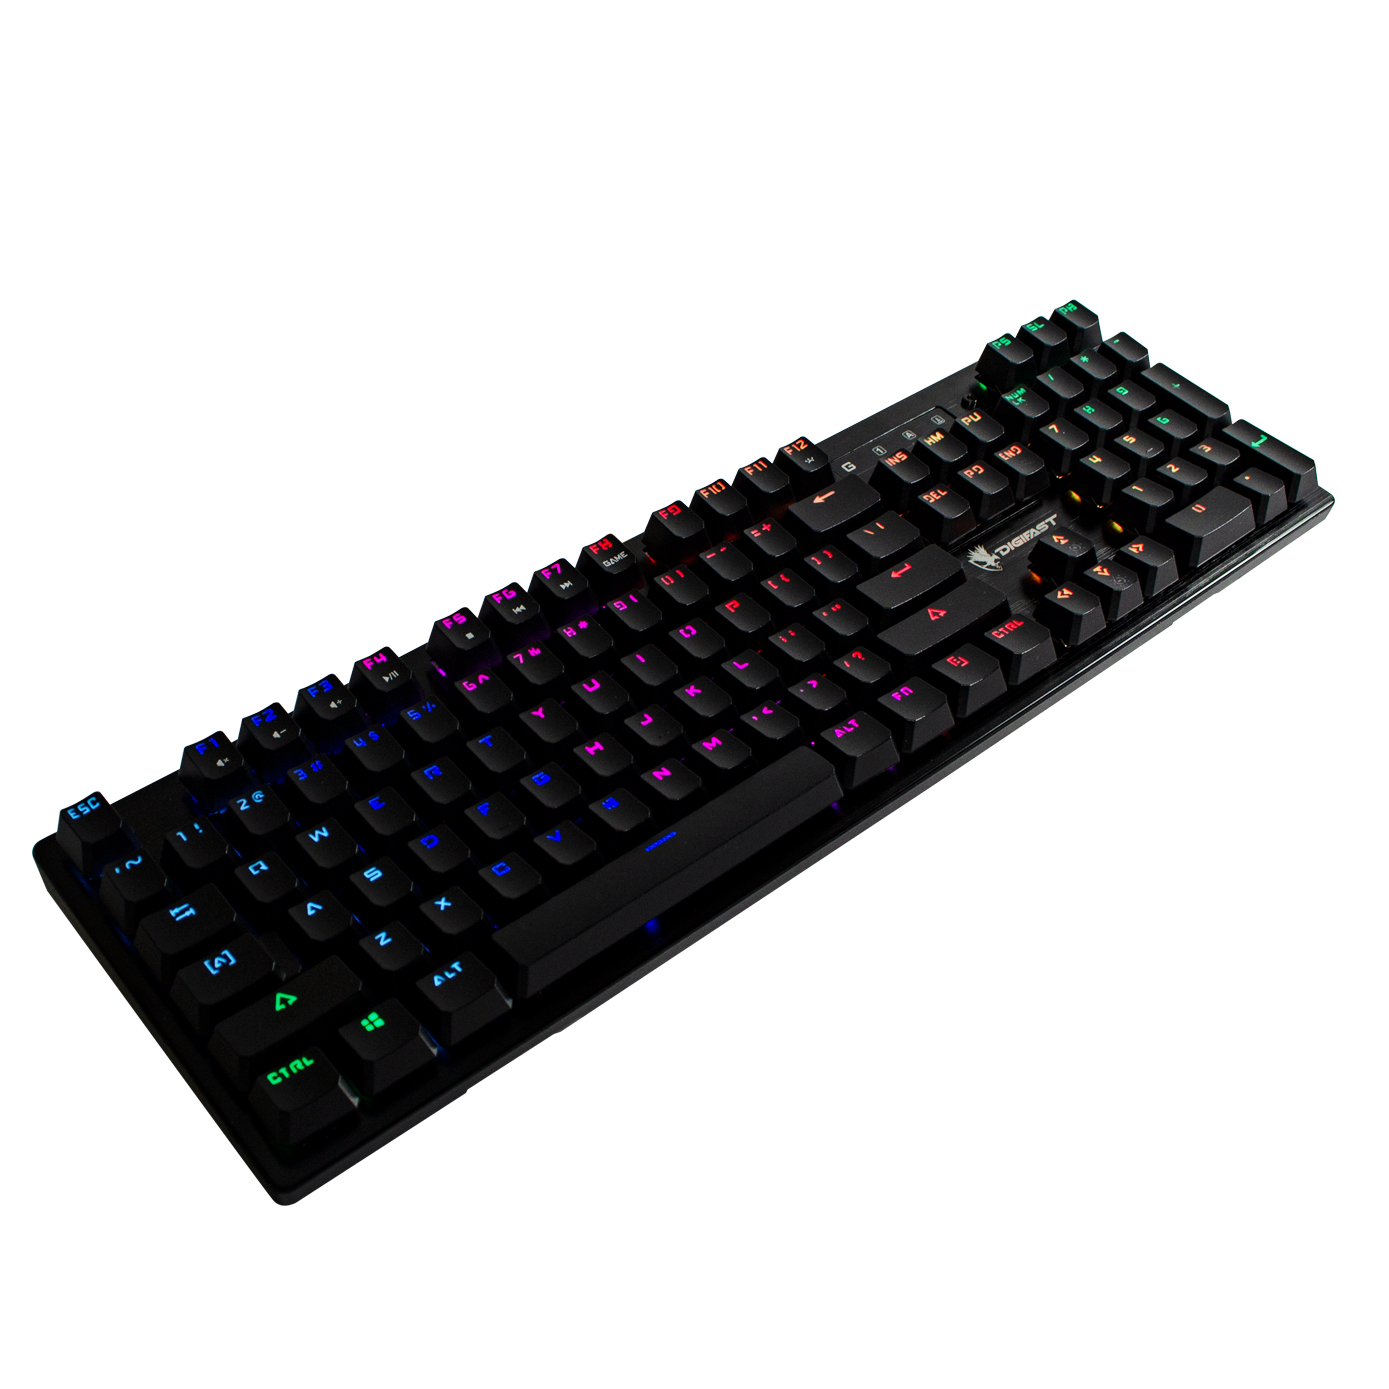 Digifast LK32 Mechanical RGB Gaming Keyboard, Optical Linear Switches 100 million durability, Customizable Color, Textured Surface, Water-Resistant